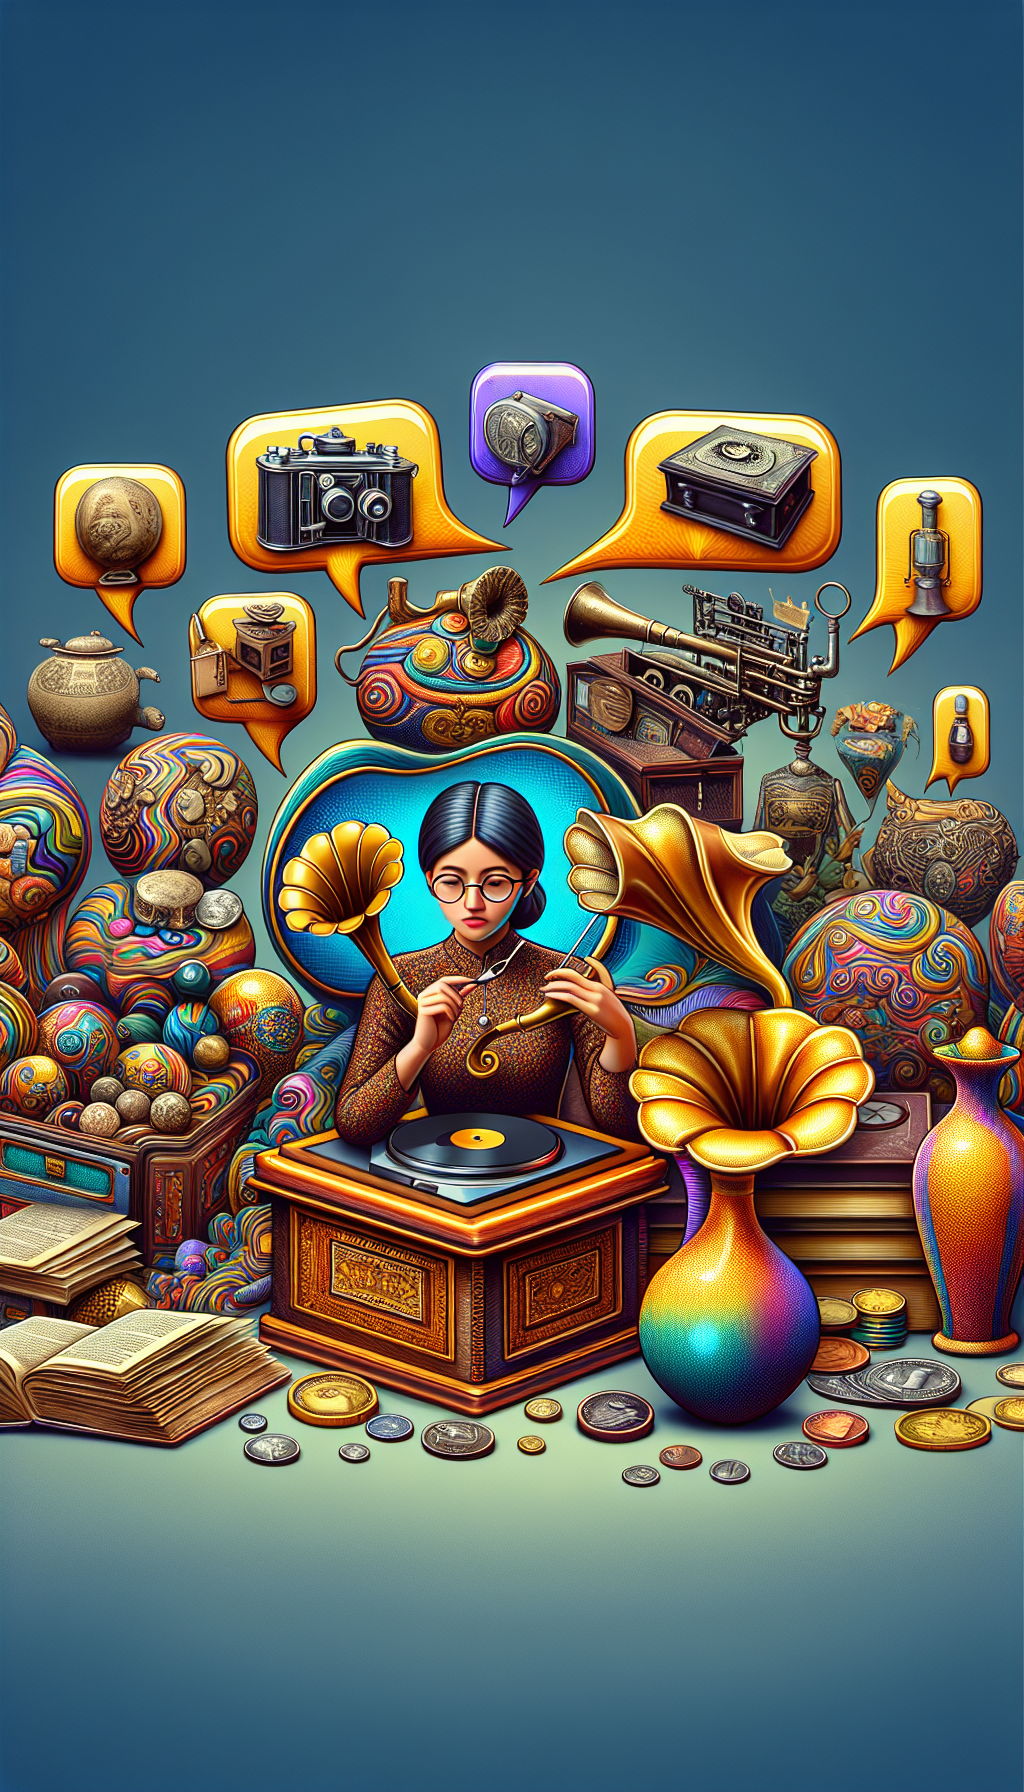 An eclectic mix of artfully skewed frames showcases an animated appraiser peering through a magnifying glass at a vibrant mosaic of antiques—a gramophone, a vintage camera, coins, a vase, and books—with each enclosing a golden tip text bubble, symbolizing the appraiser's insights into assembling a collection of value.